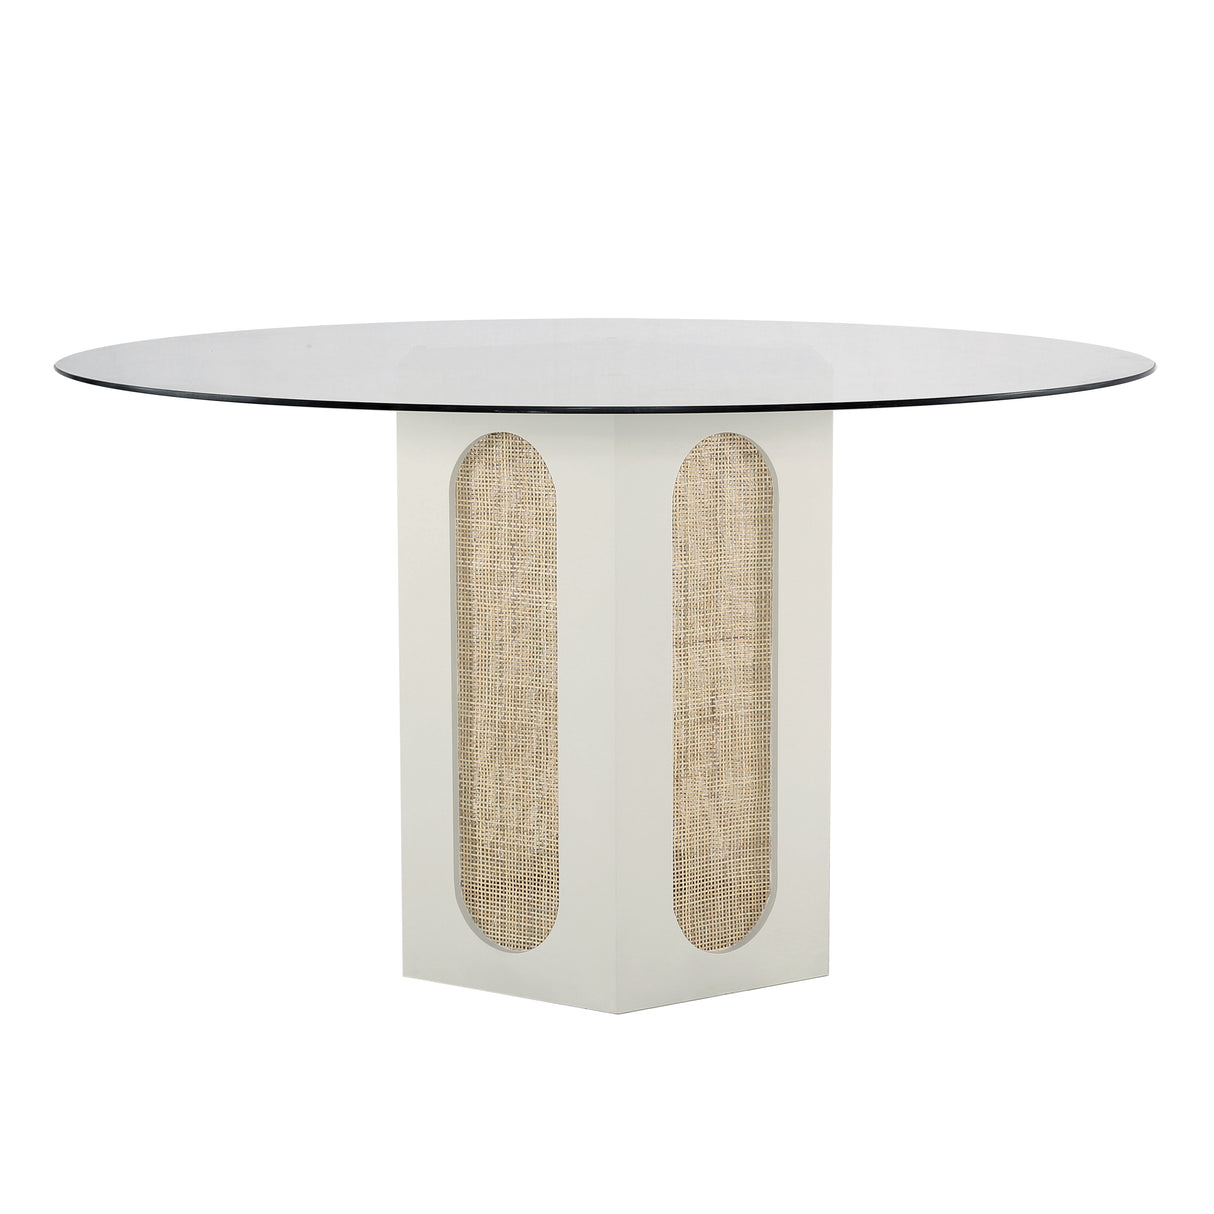 Elk S0075-9886 Clearwater Dining Table - Shoji White